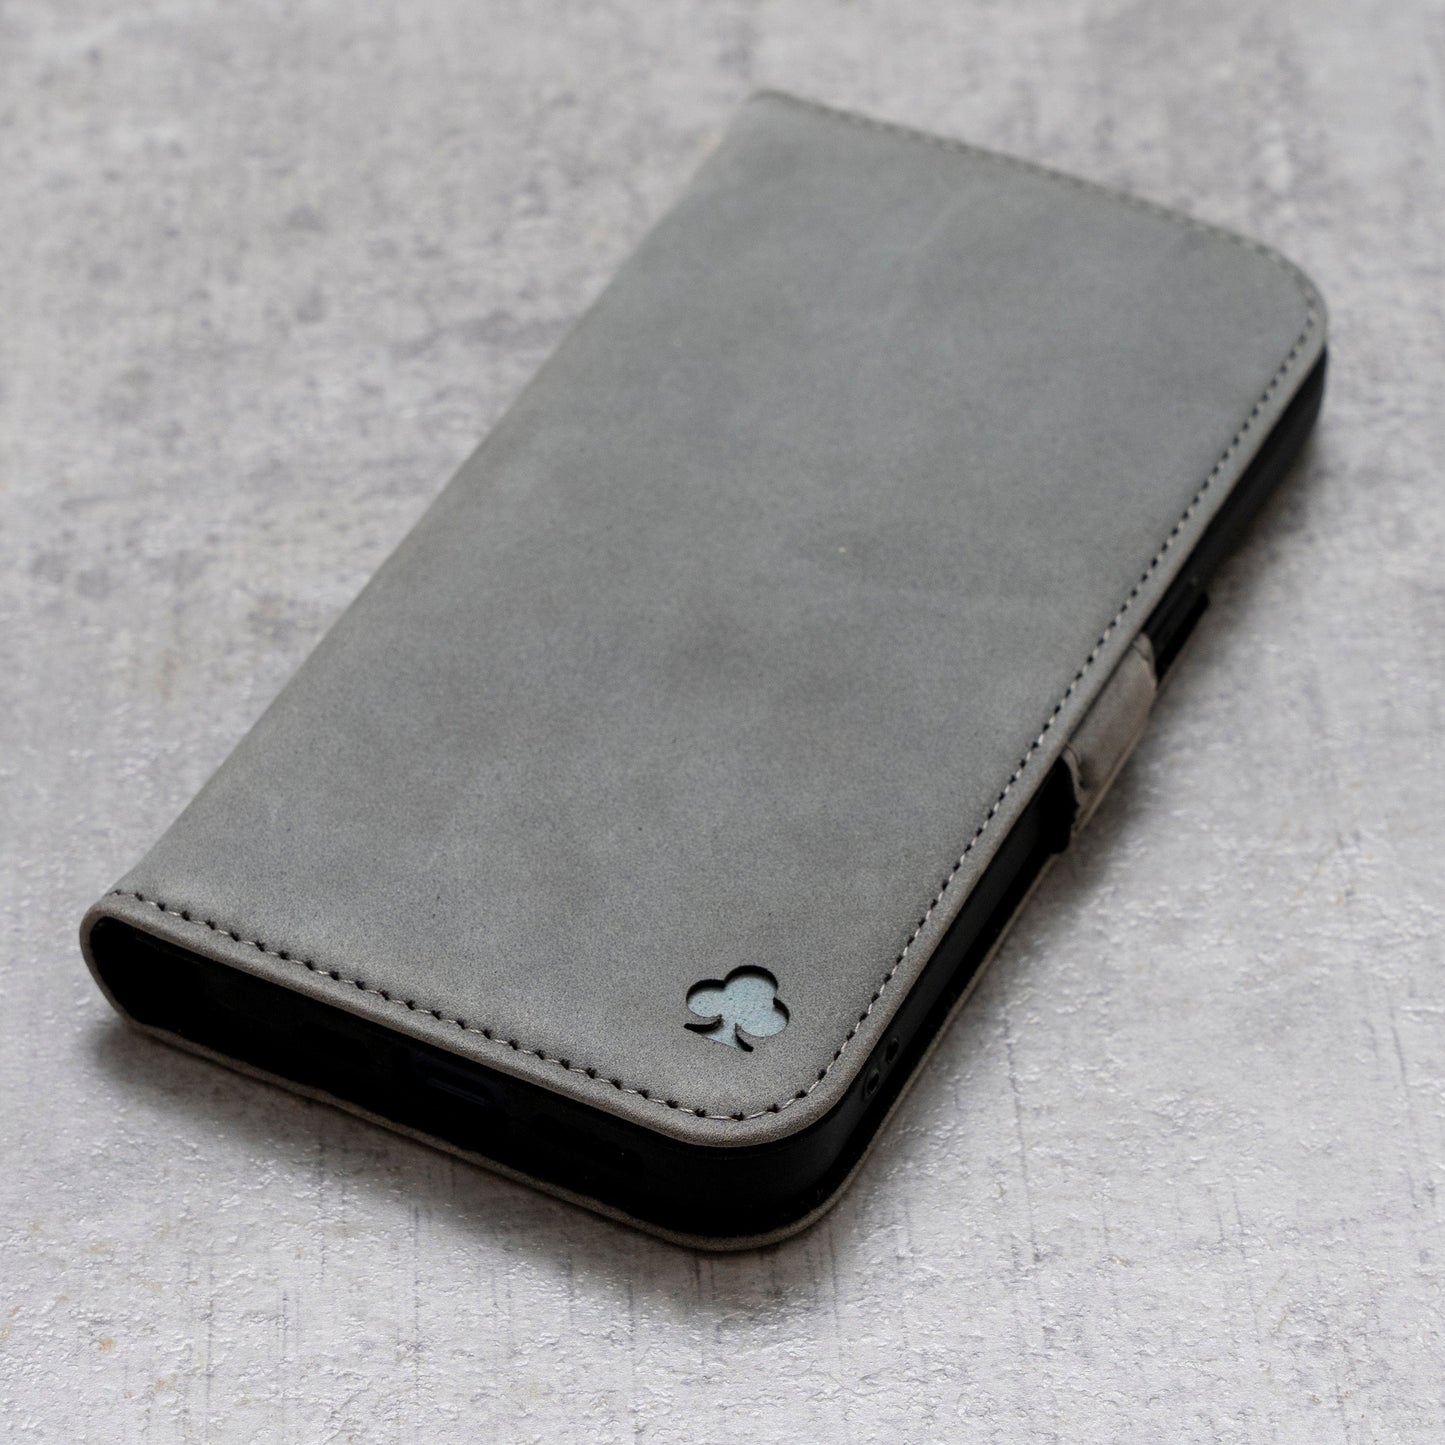 iPhone 11 Leather Case. Premium Nubuck Genuine Leather Stand Case/Cover/Wallet (Grey, Black)